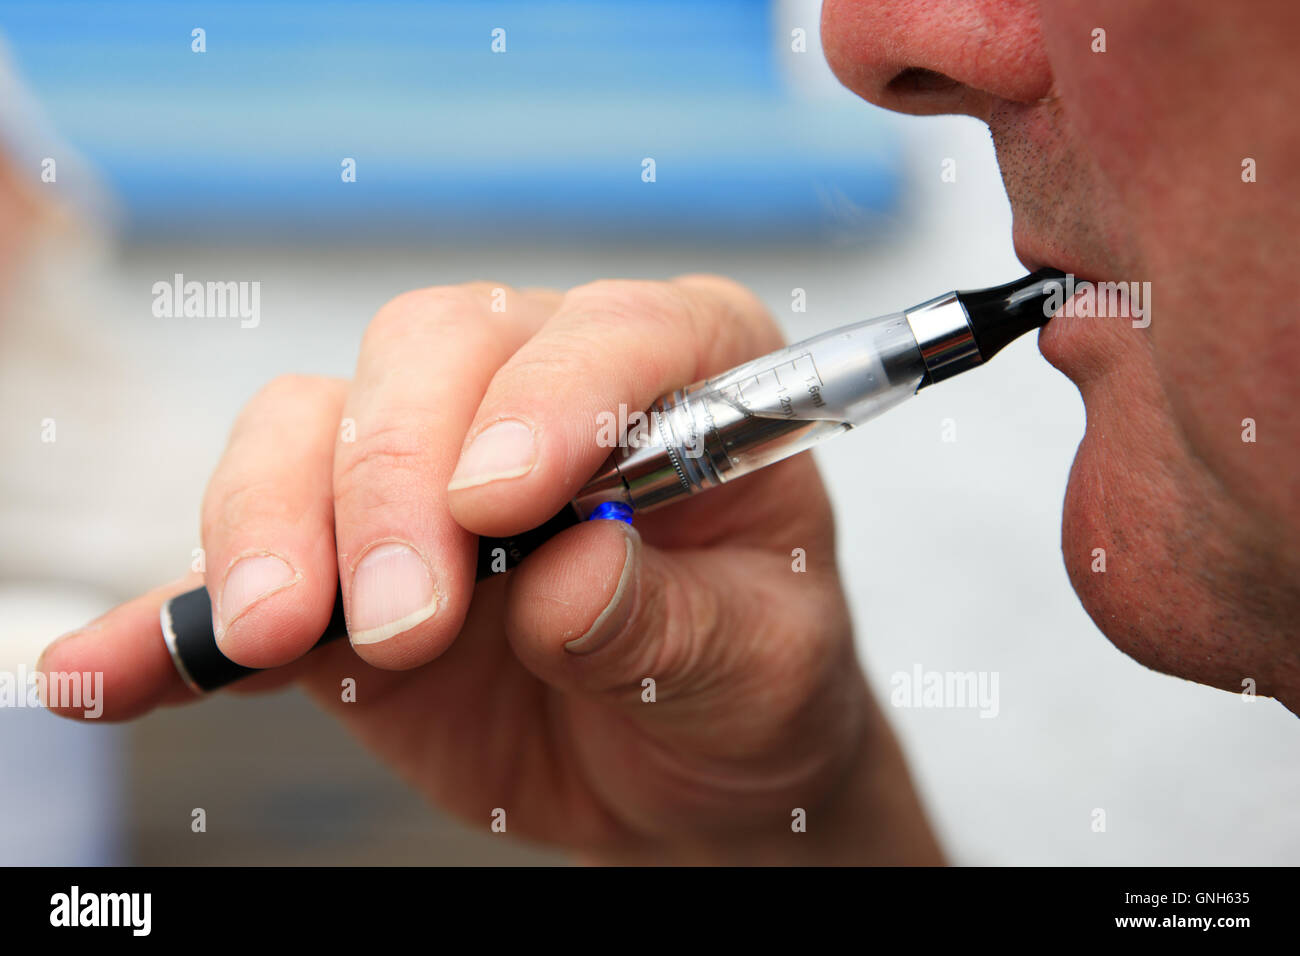 Man vaping on an electronic cigarette Stock Photo